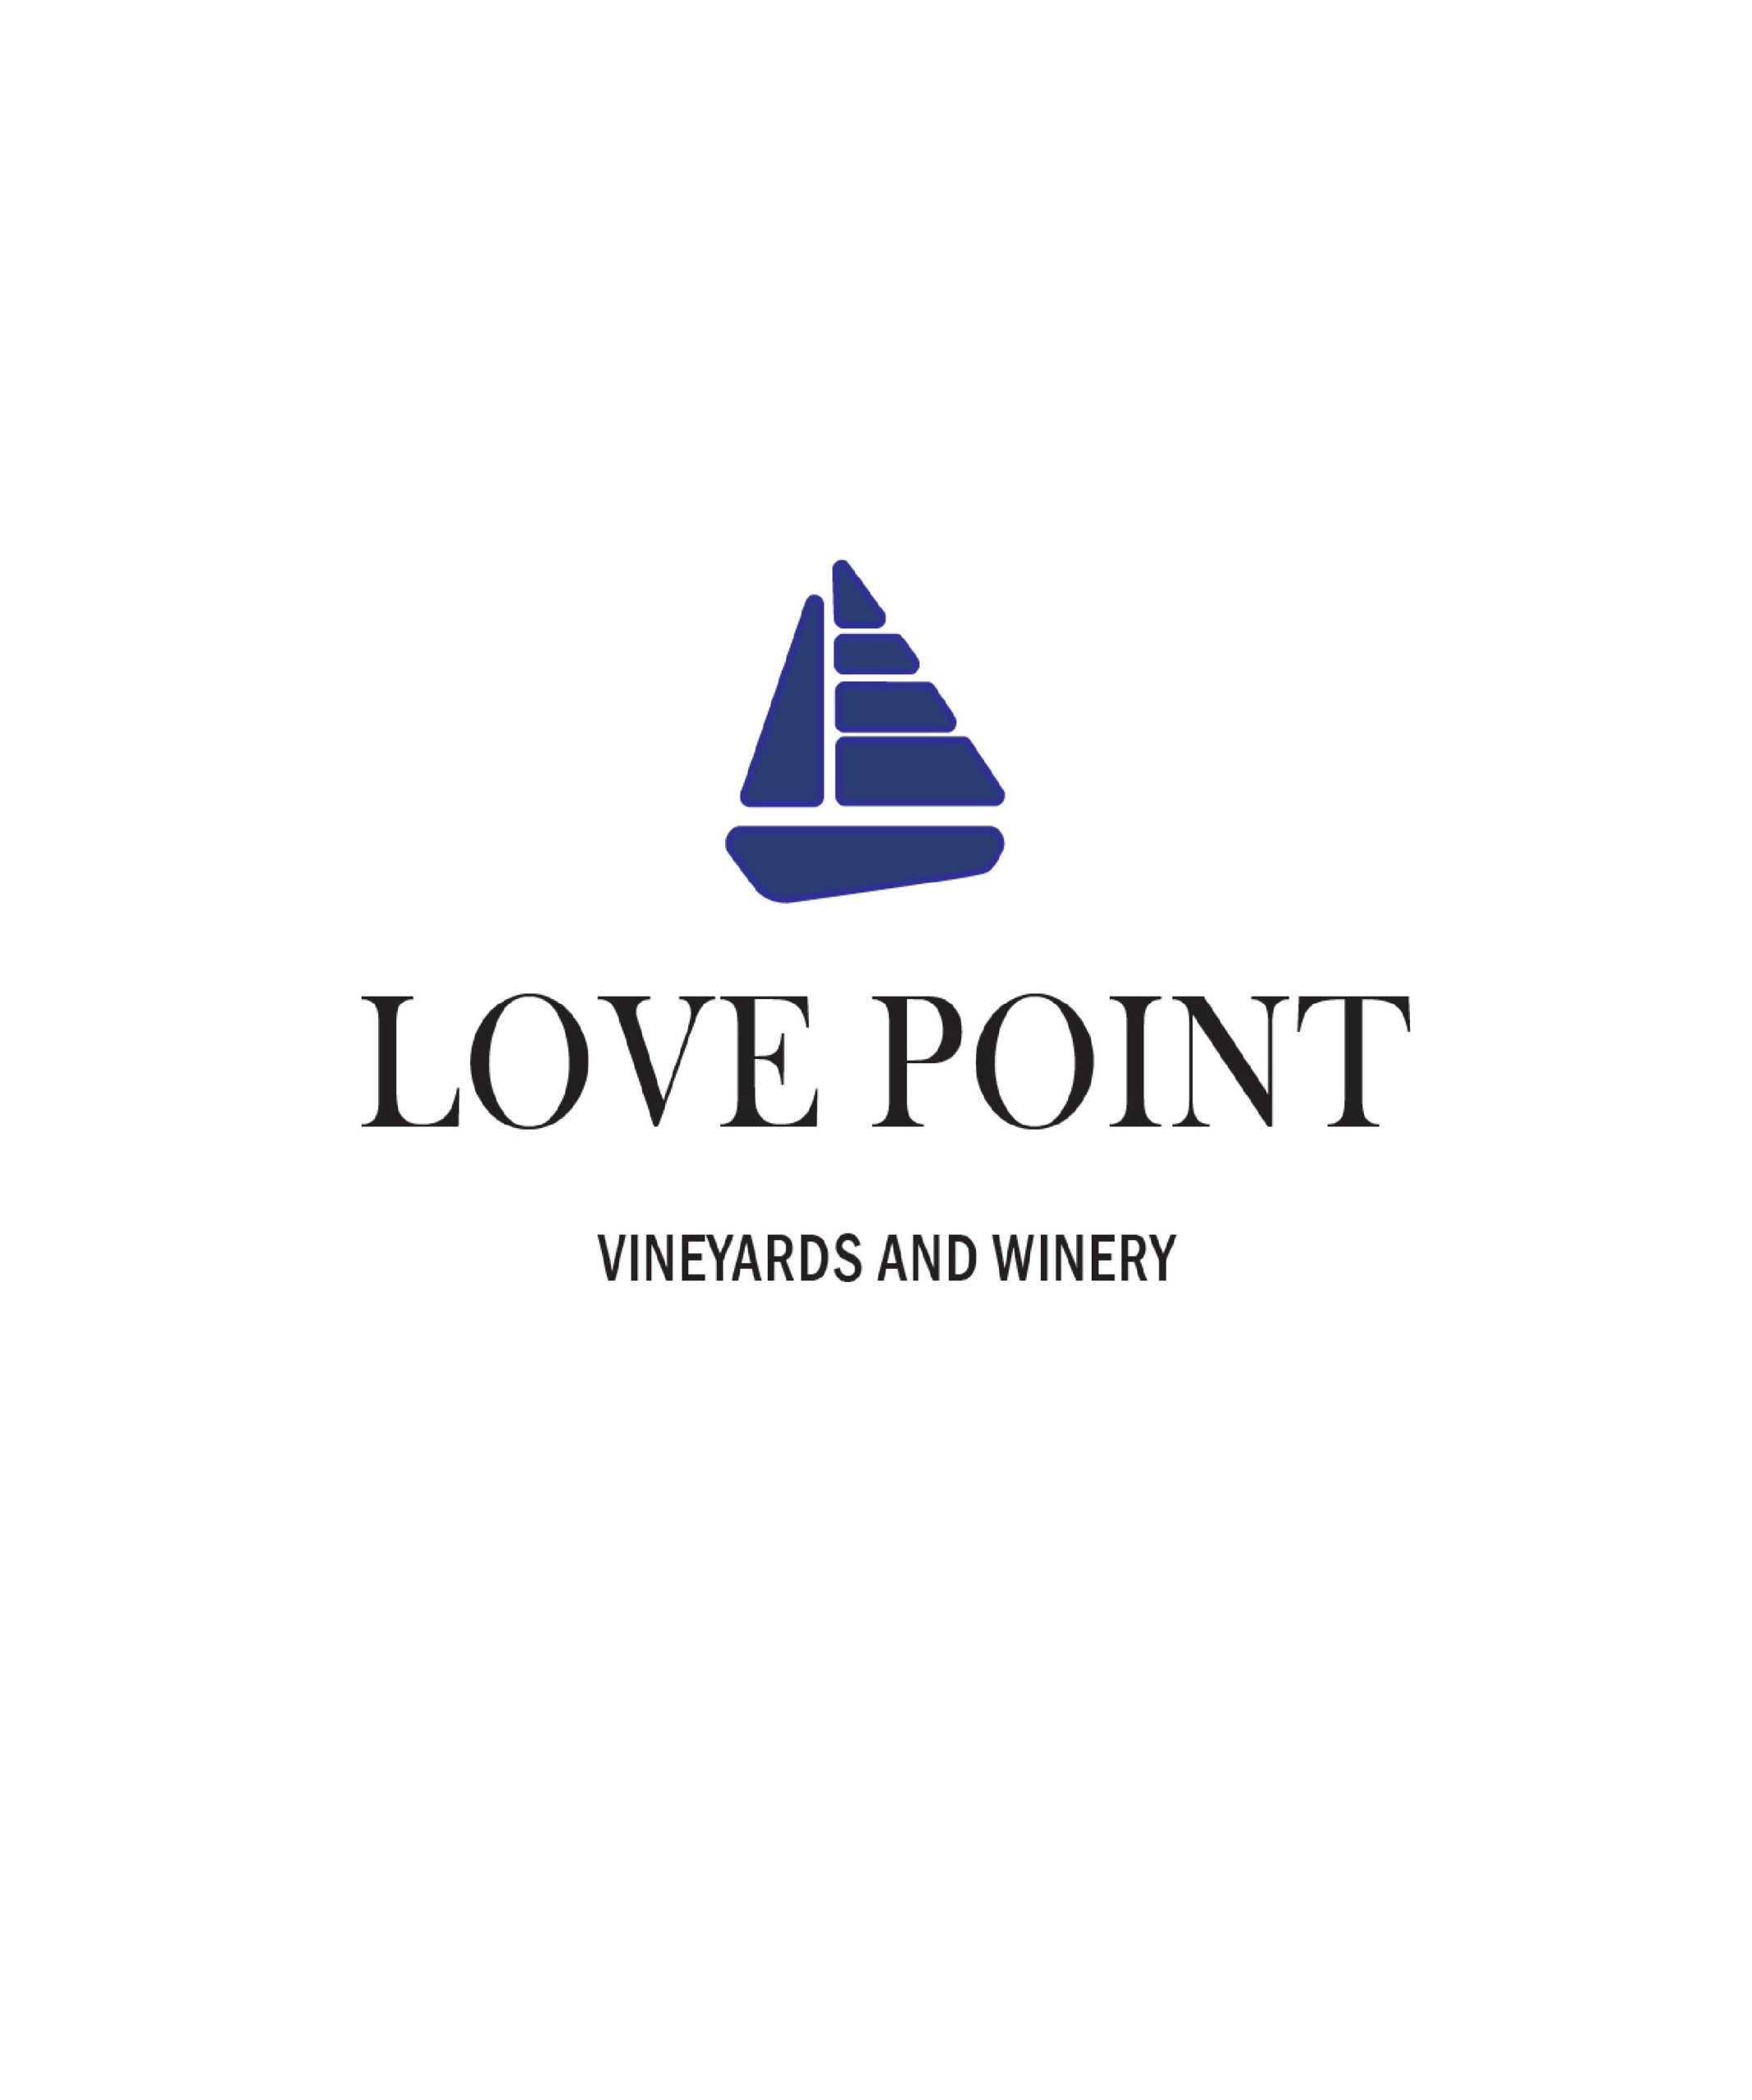 Logo for Love Point Vineyards and Winery